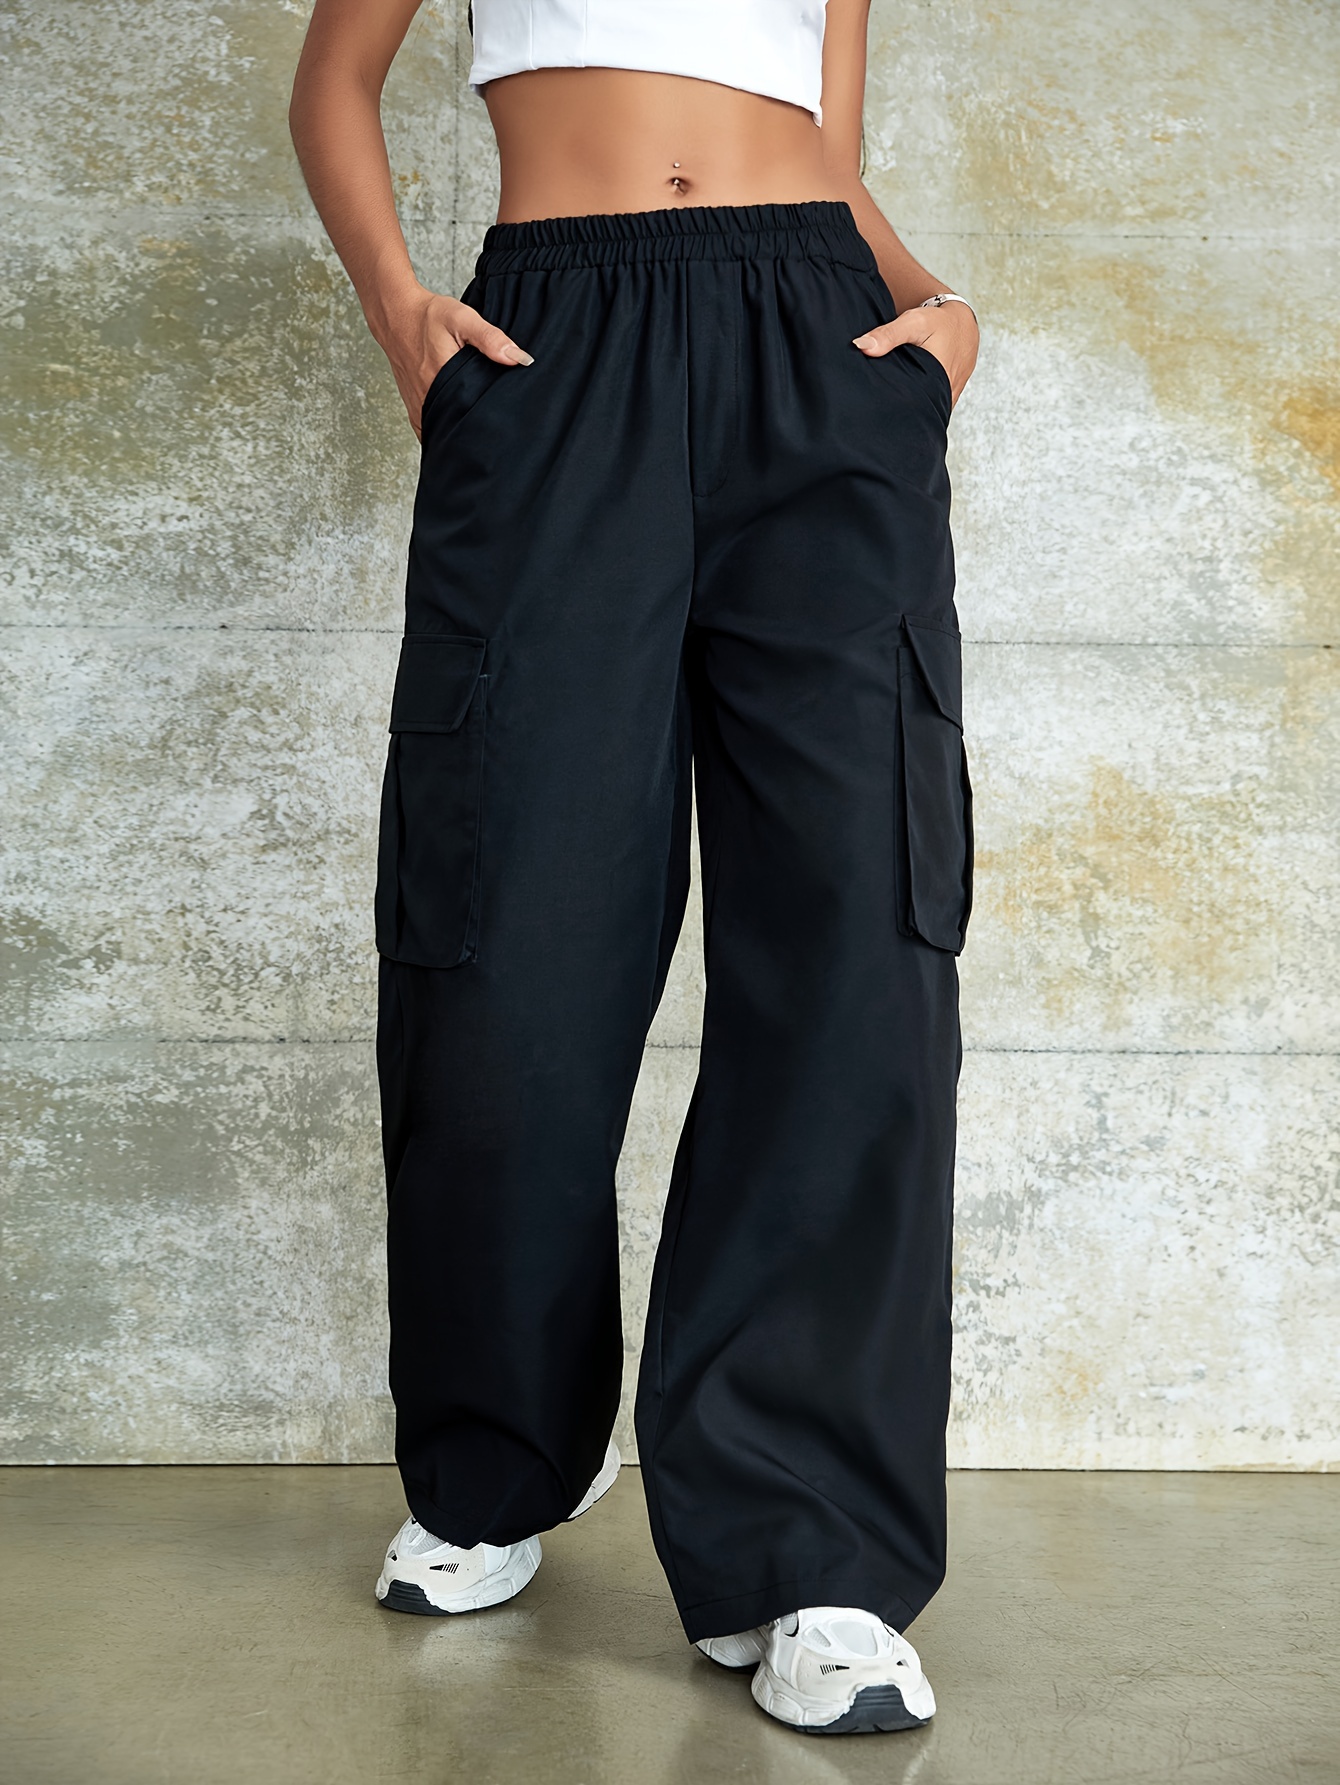 Track Pants Women Tall Women Wide Leg Casual Pants with Pockets